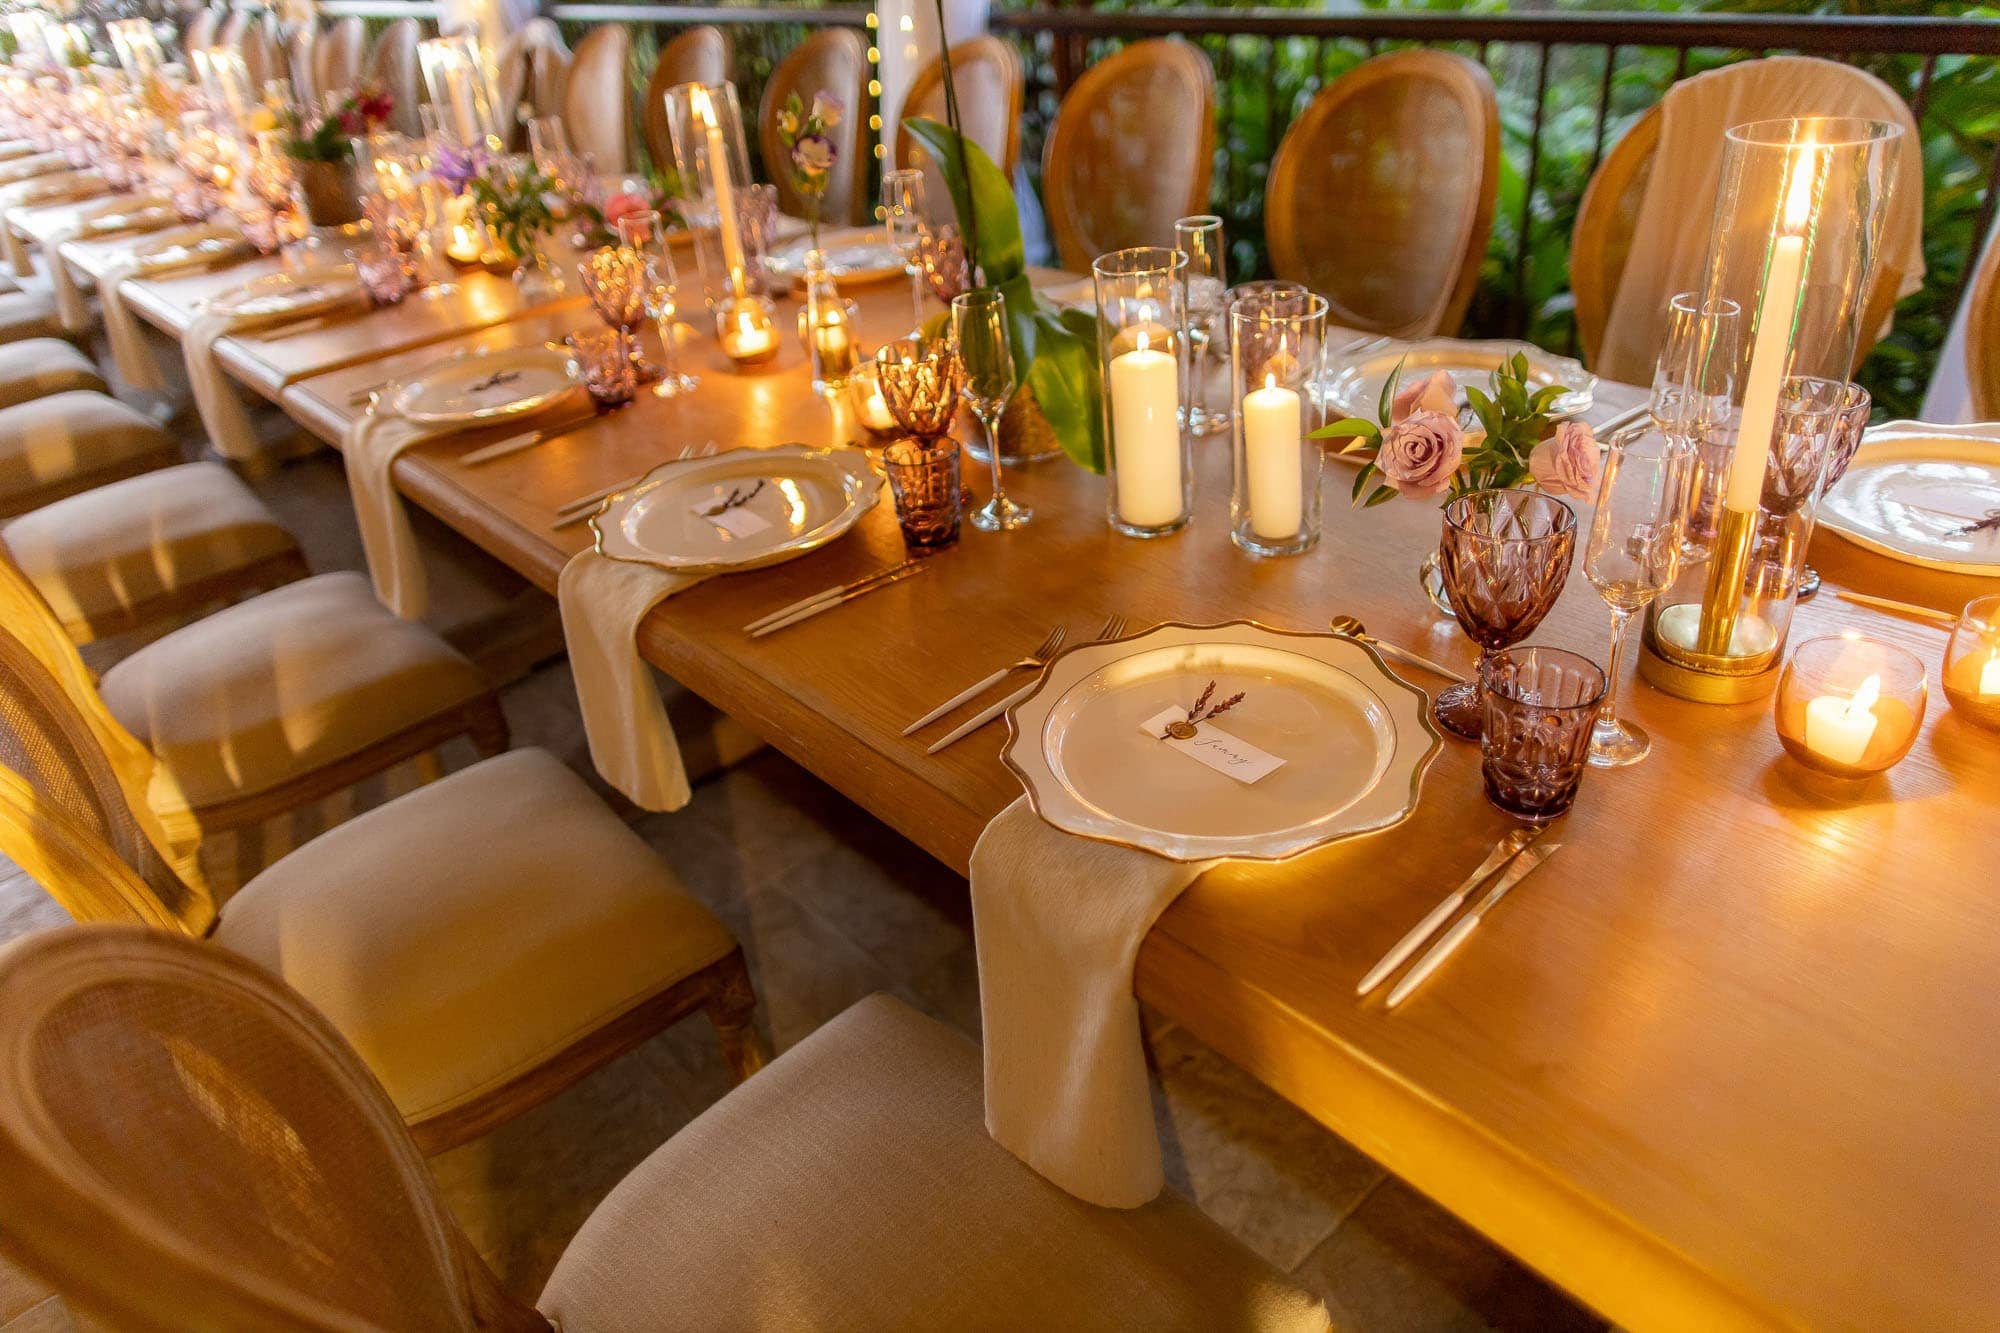 the lovely reception spread at this Uvita, Costa rica wedding